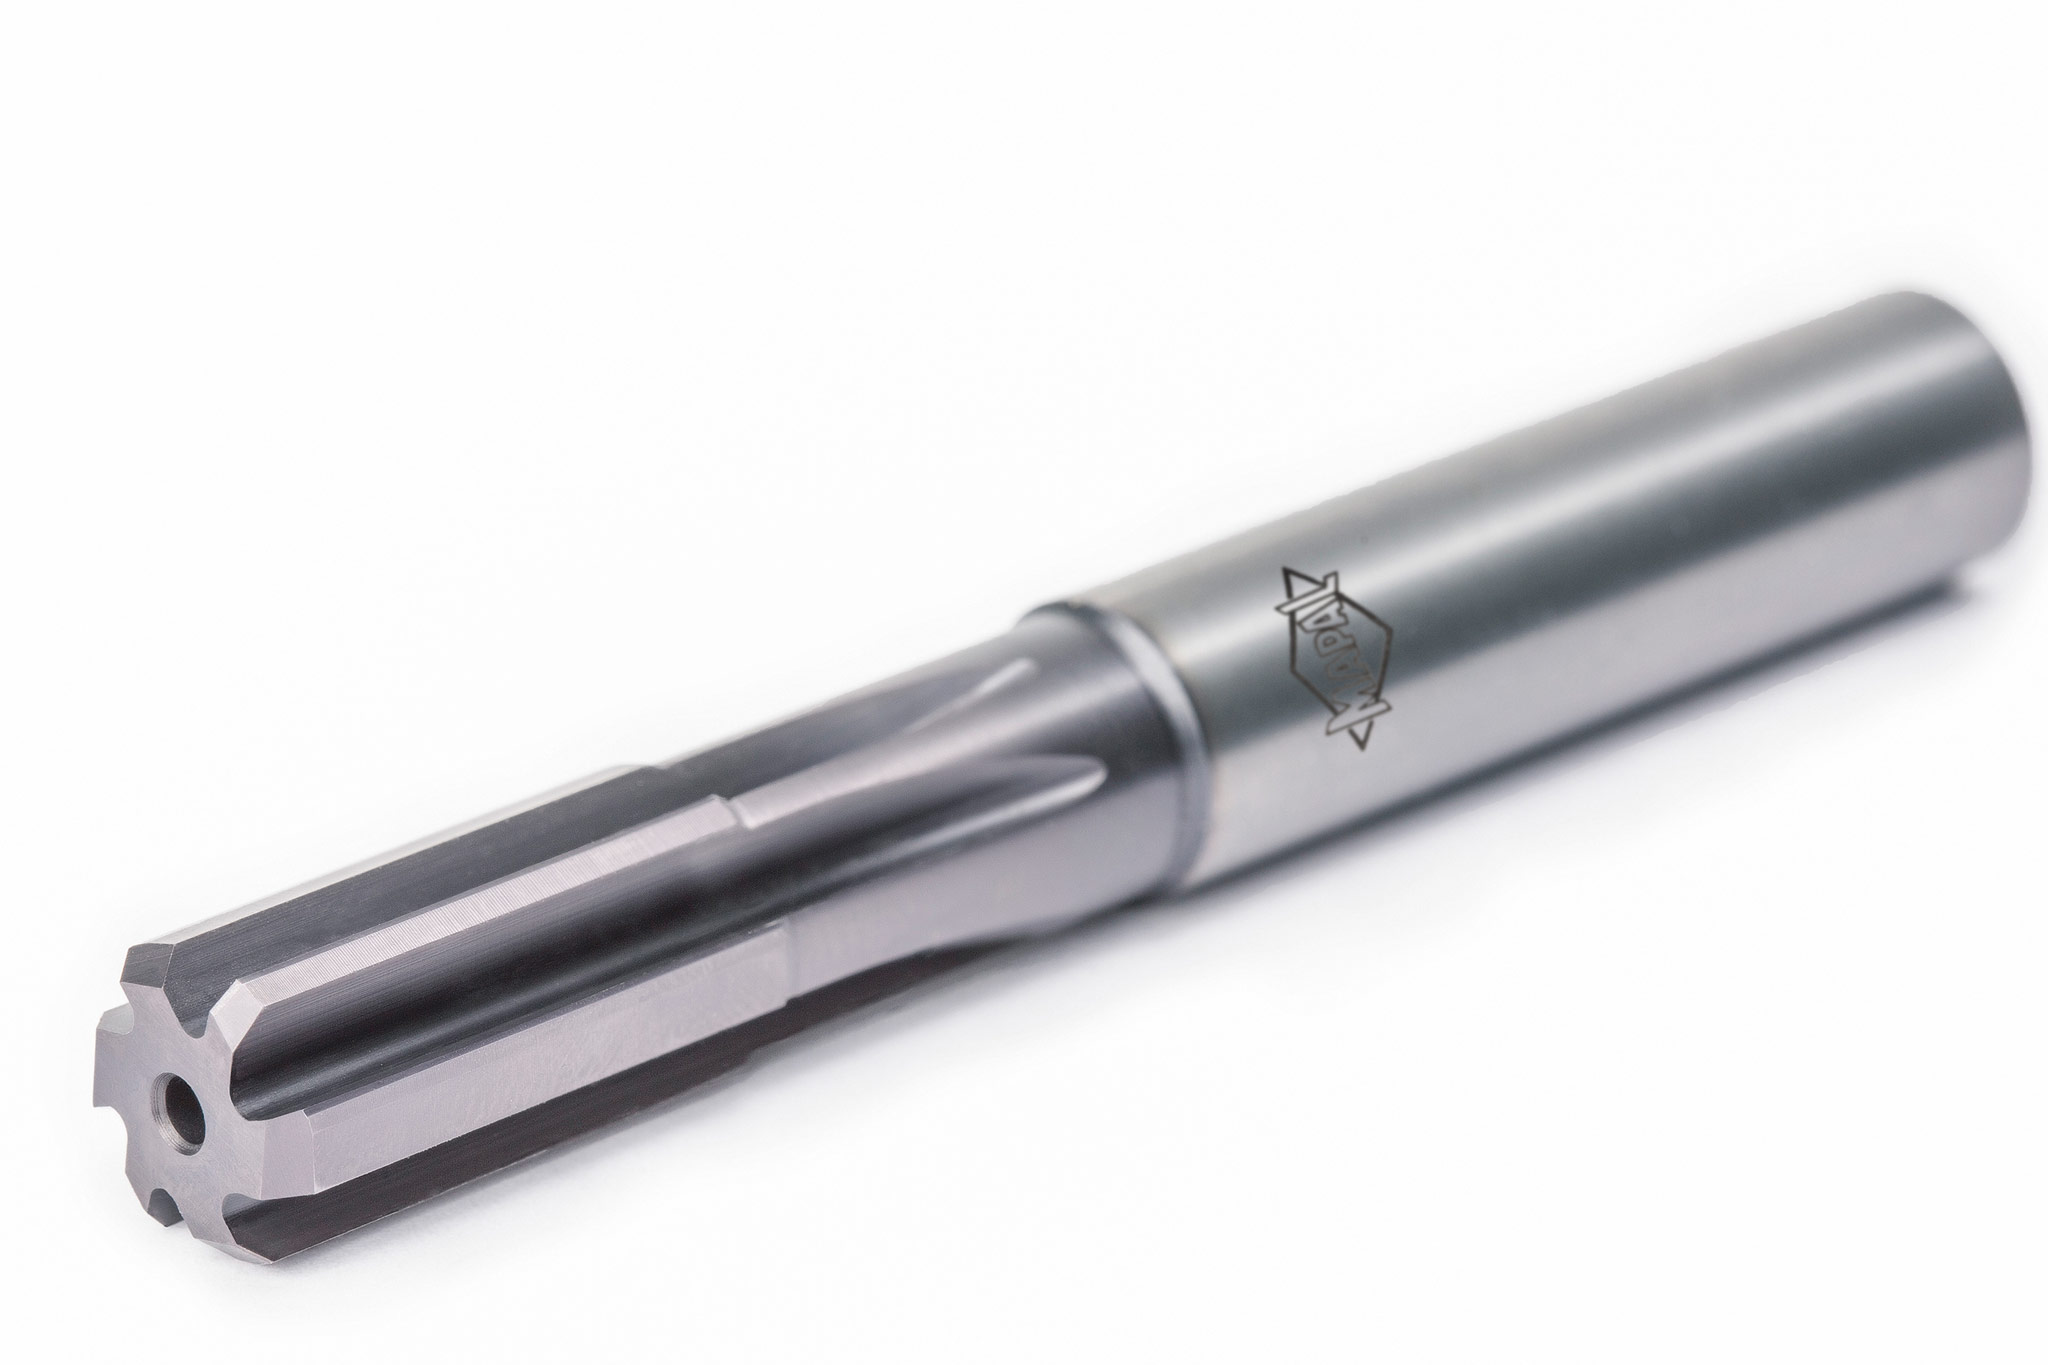 The high-performance reamer FixReam Short Plus from MAPAL in side view.